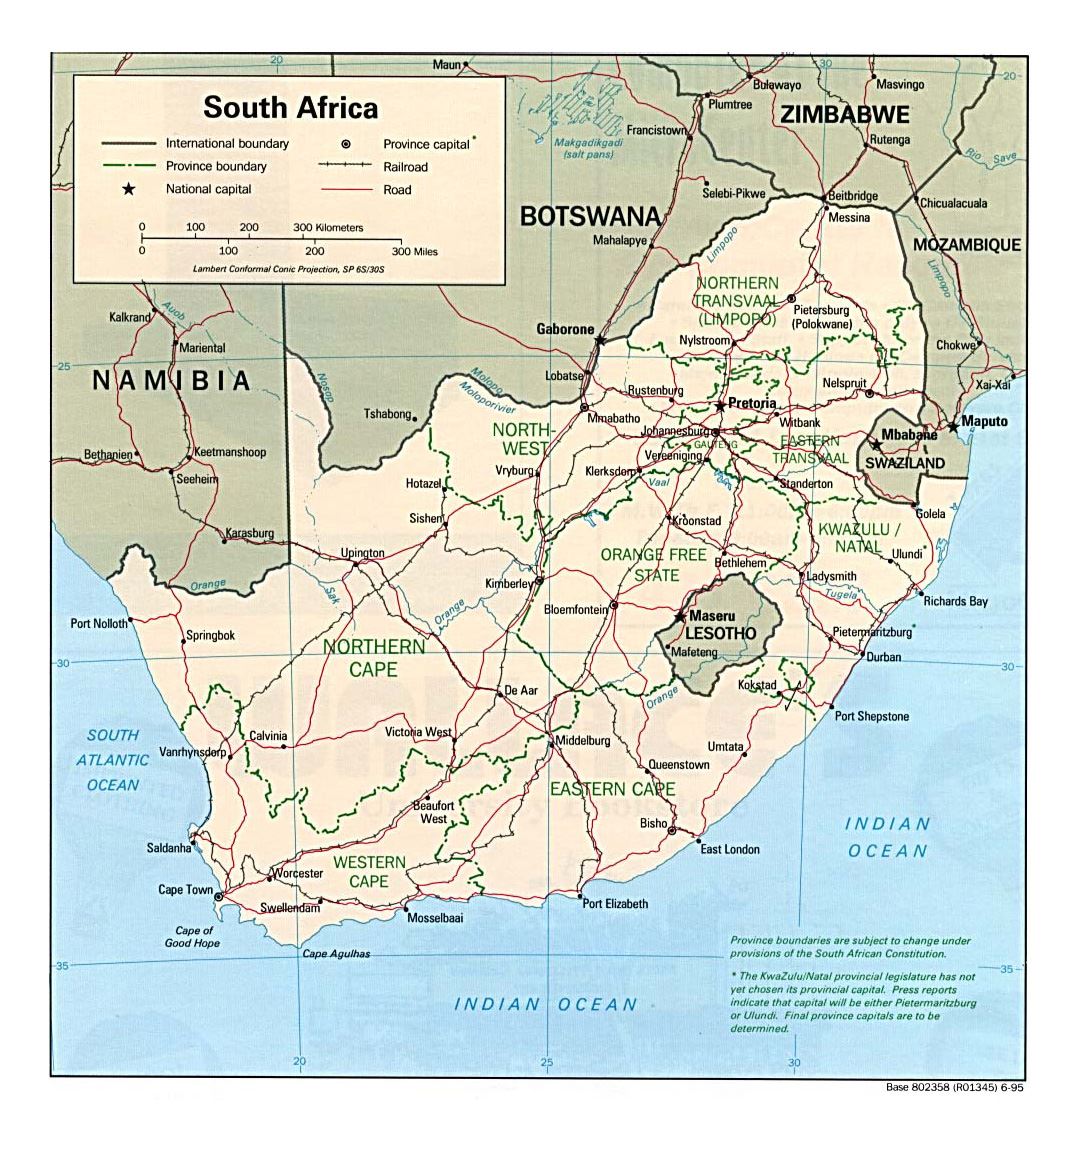 Detailed political and administrative map of South Africa with roads, railroads and major cities - 1995